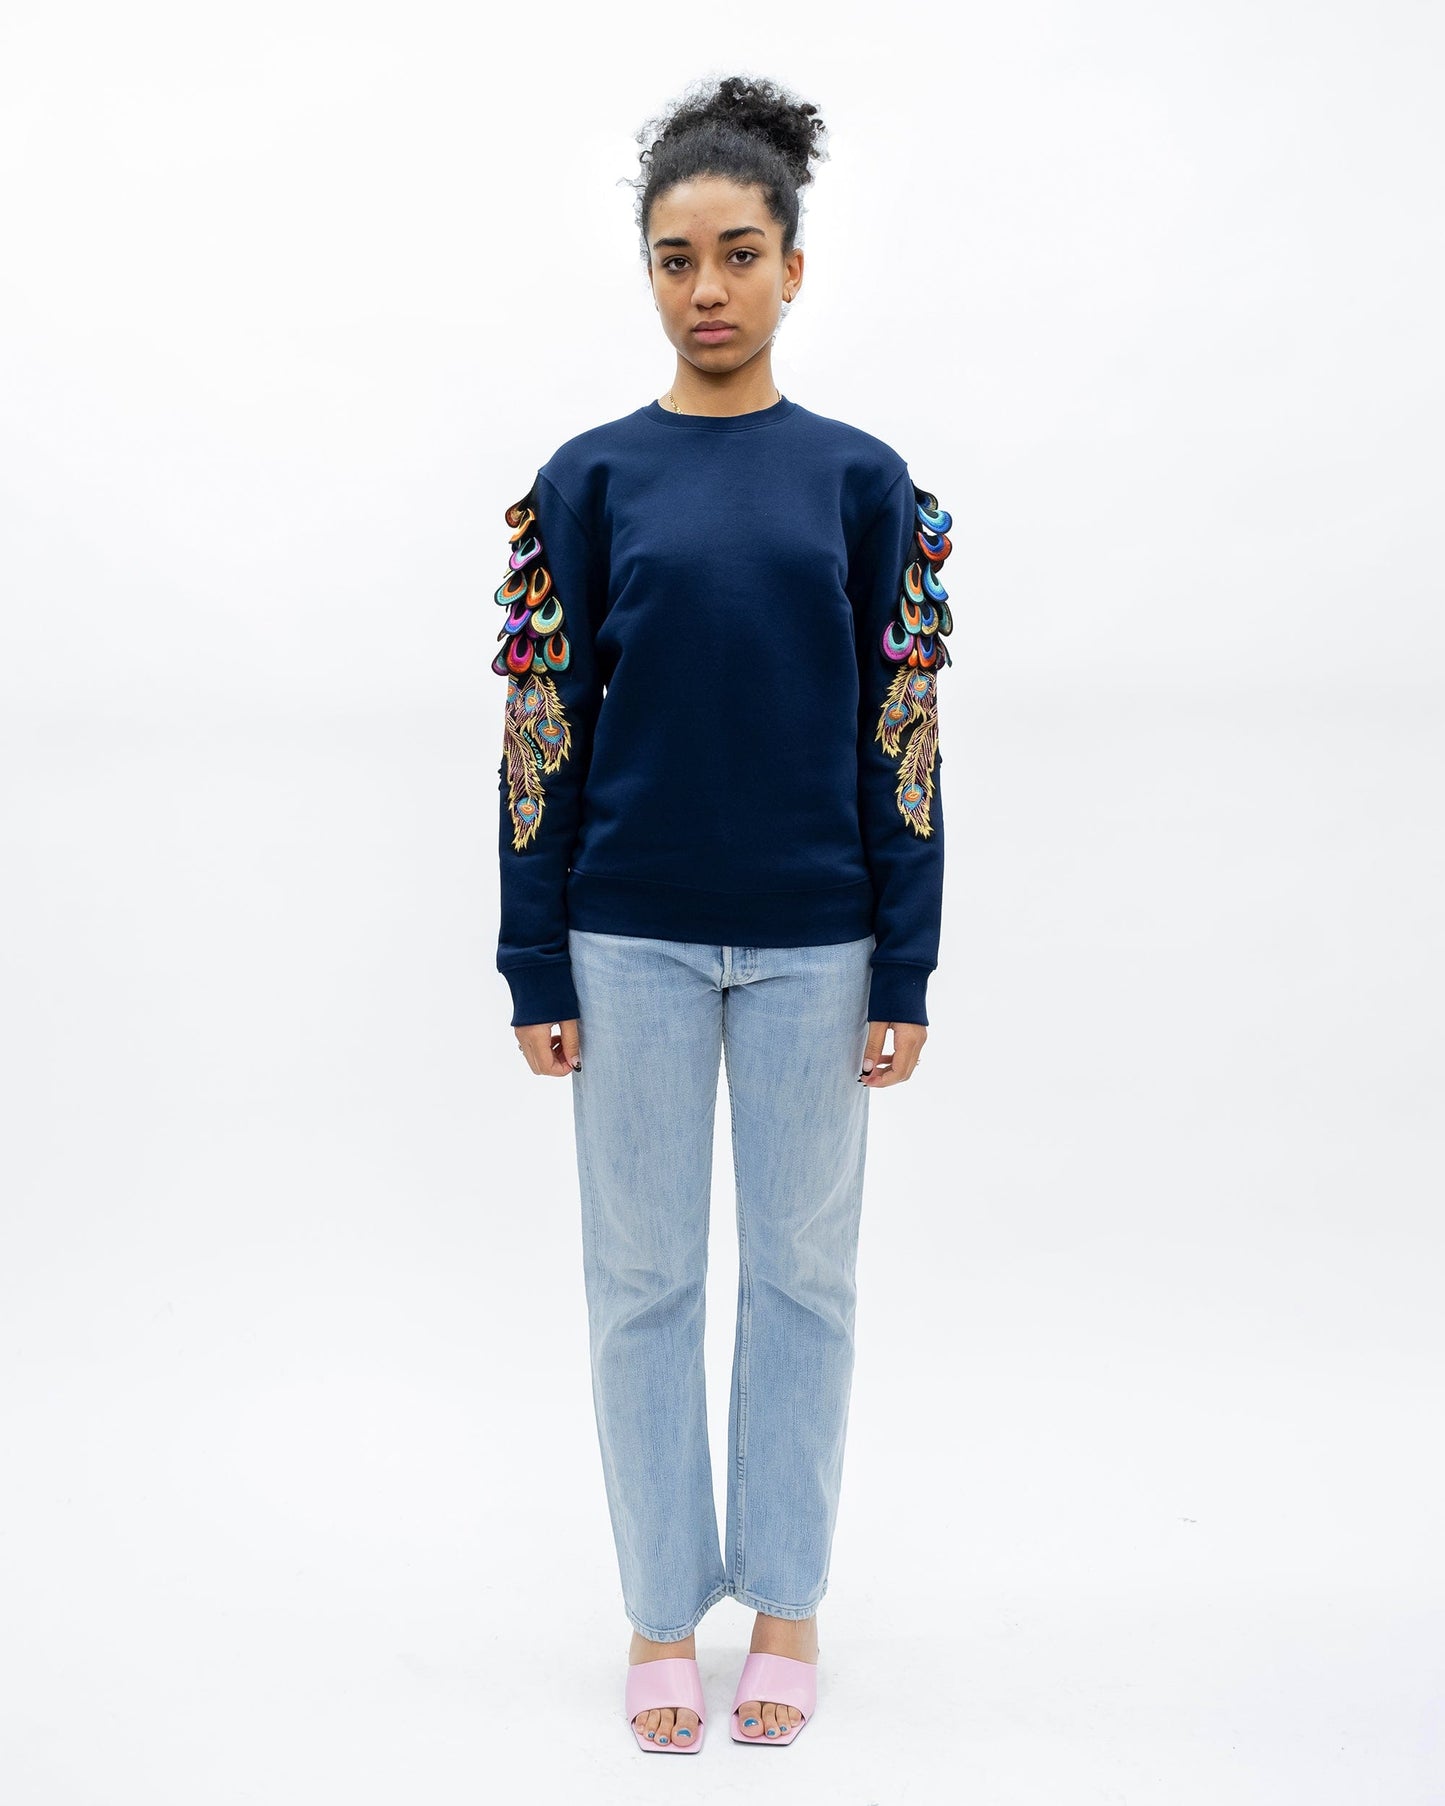 Evergreen - French Navy Psychedelic Peacock Patch Sweatshirt